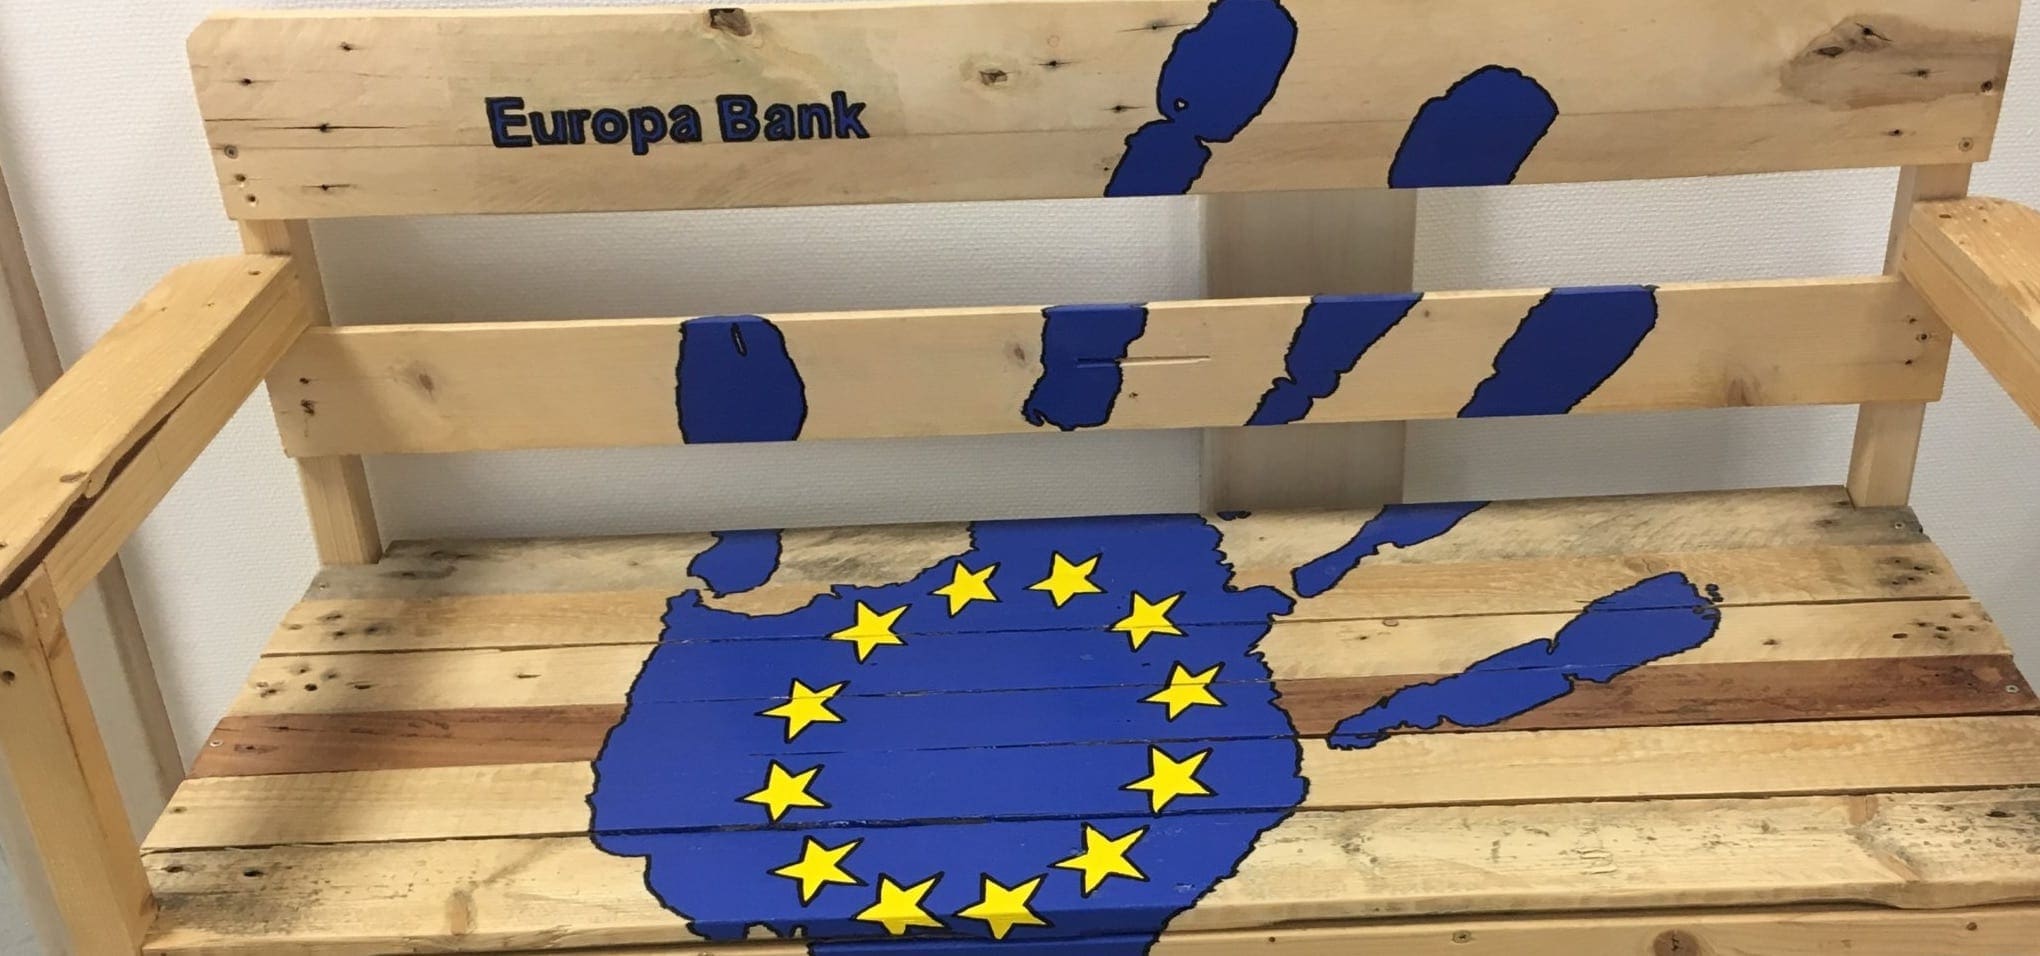 One of two euro banks created by the construction guild.